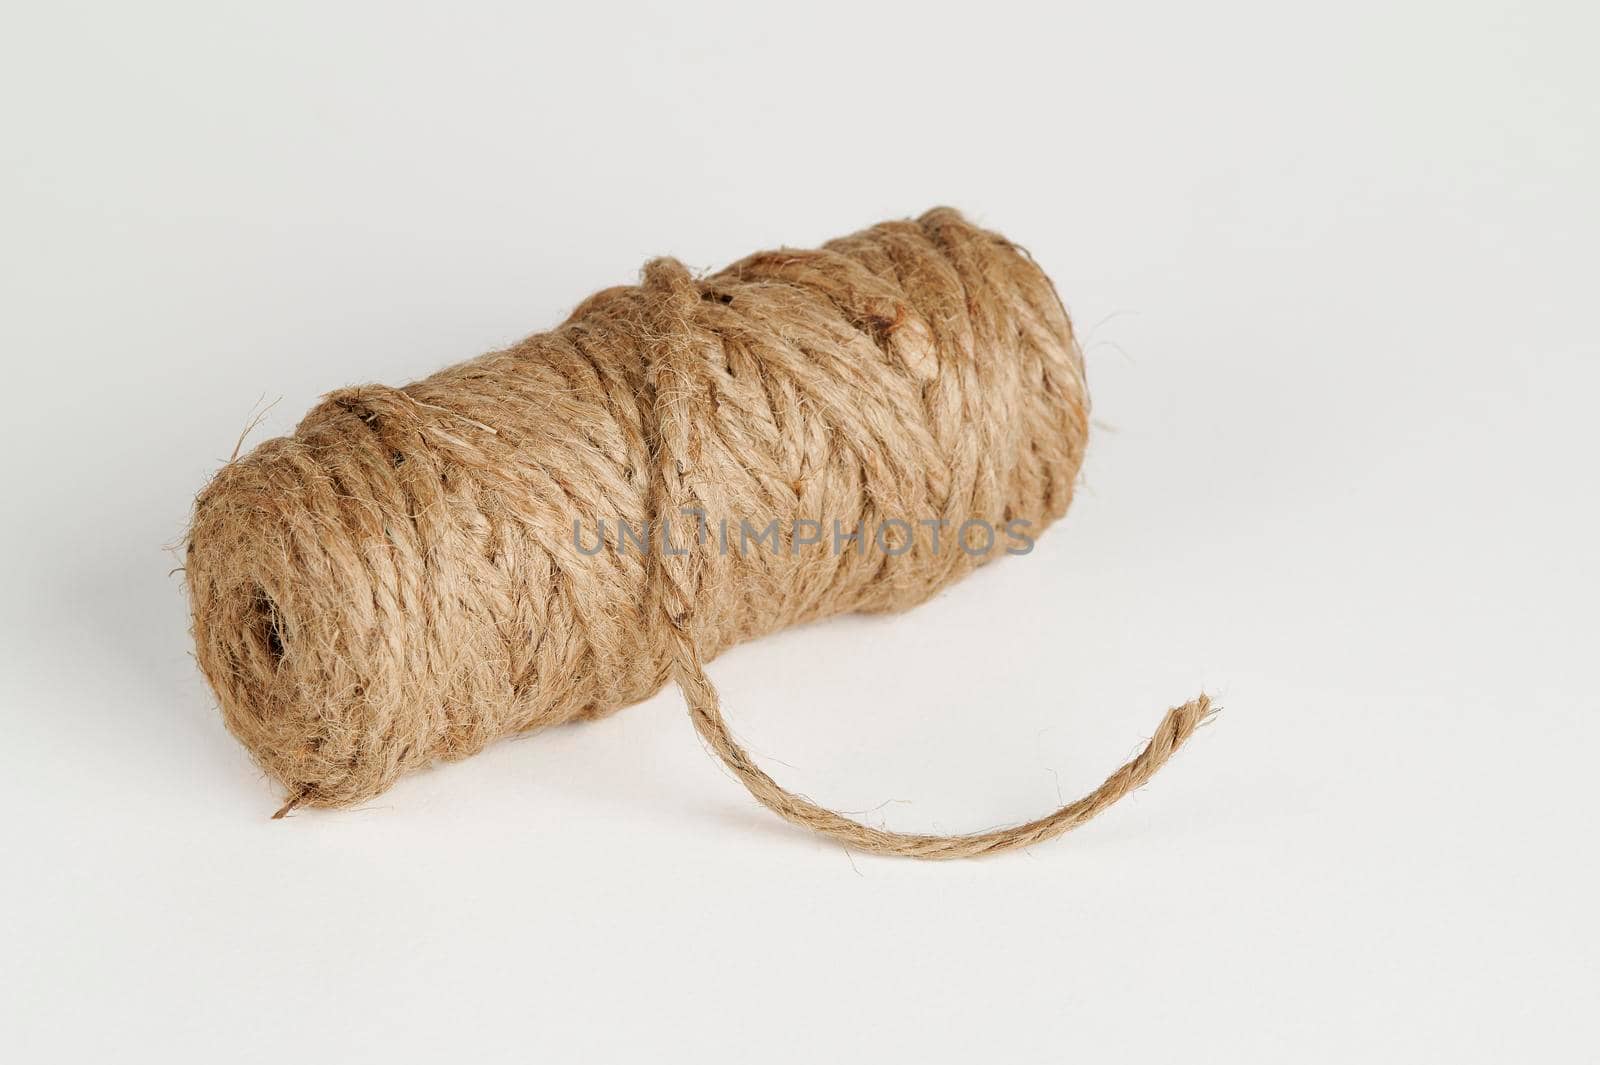 Skein of Jute twine on a white background